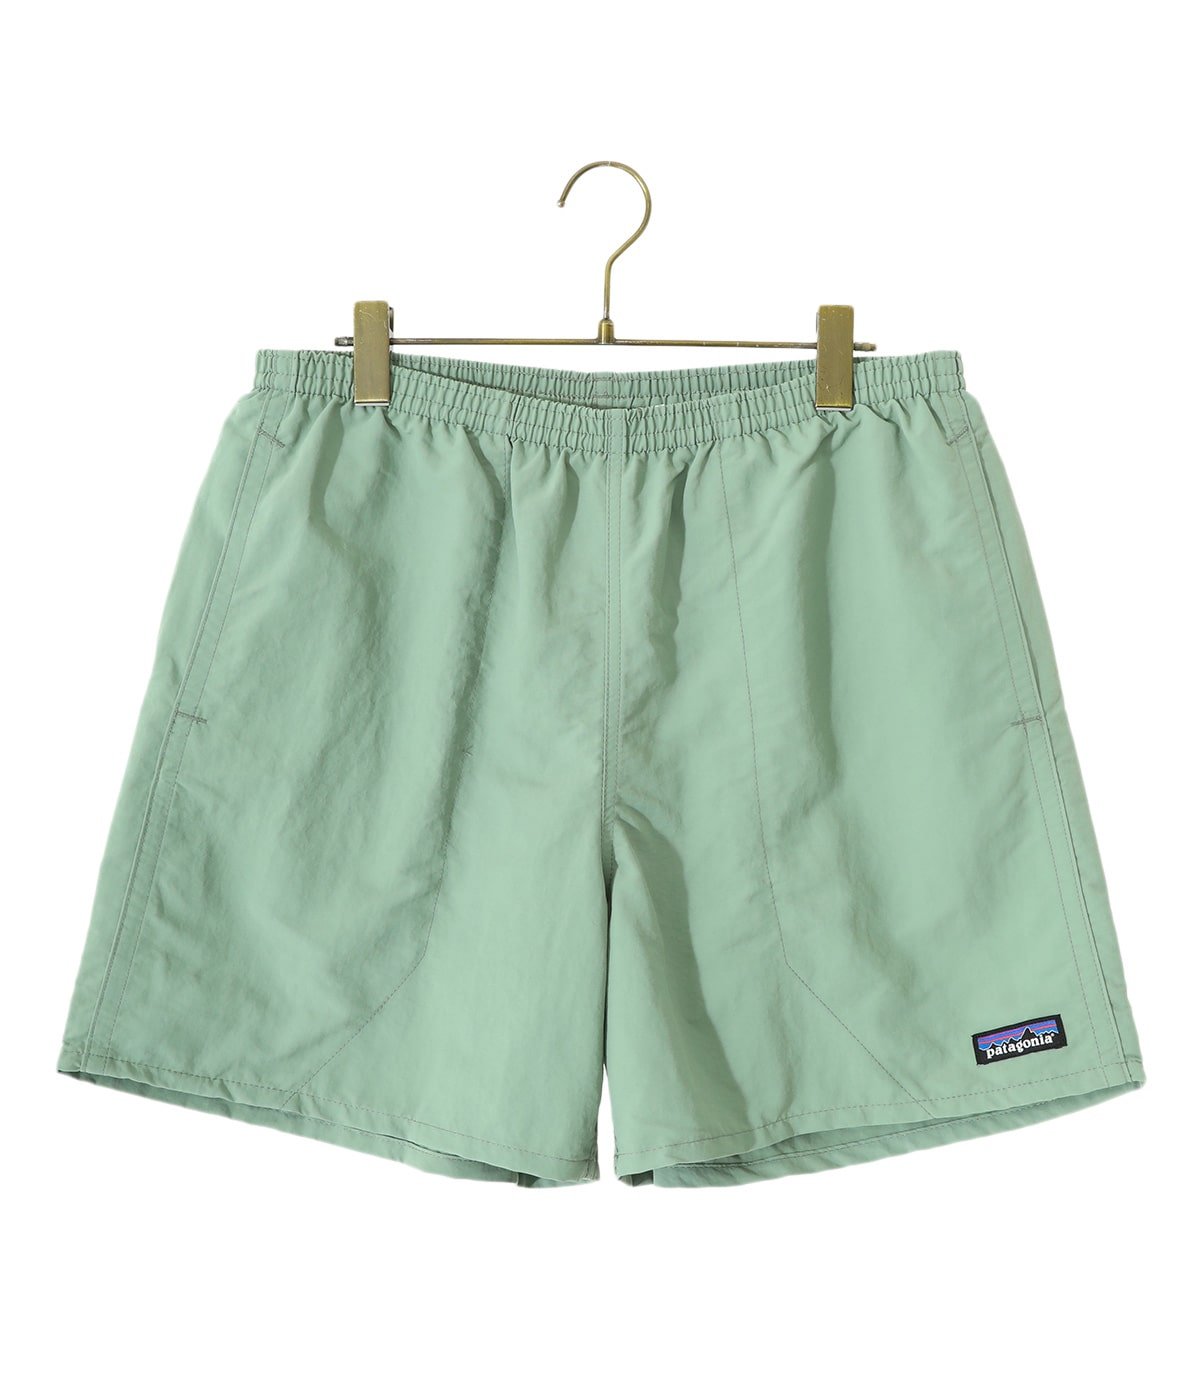 M's Baggies Shorts - 5 in -PLGY-